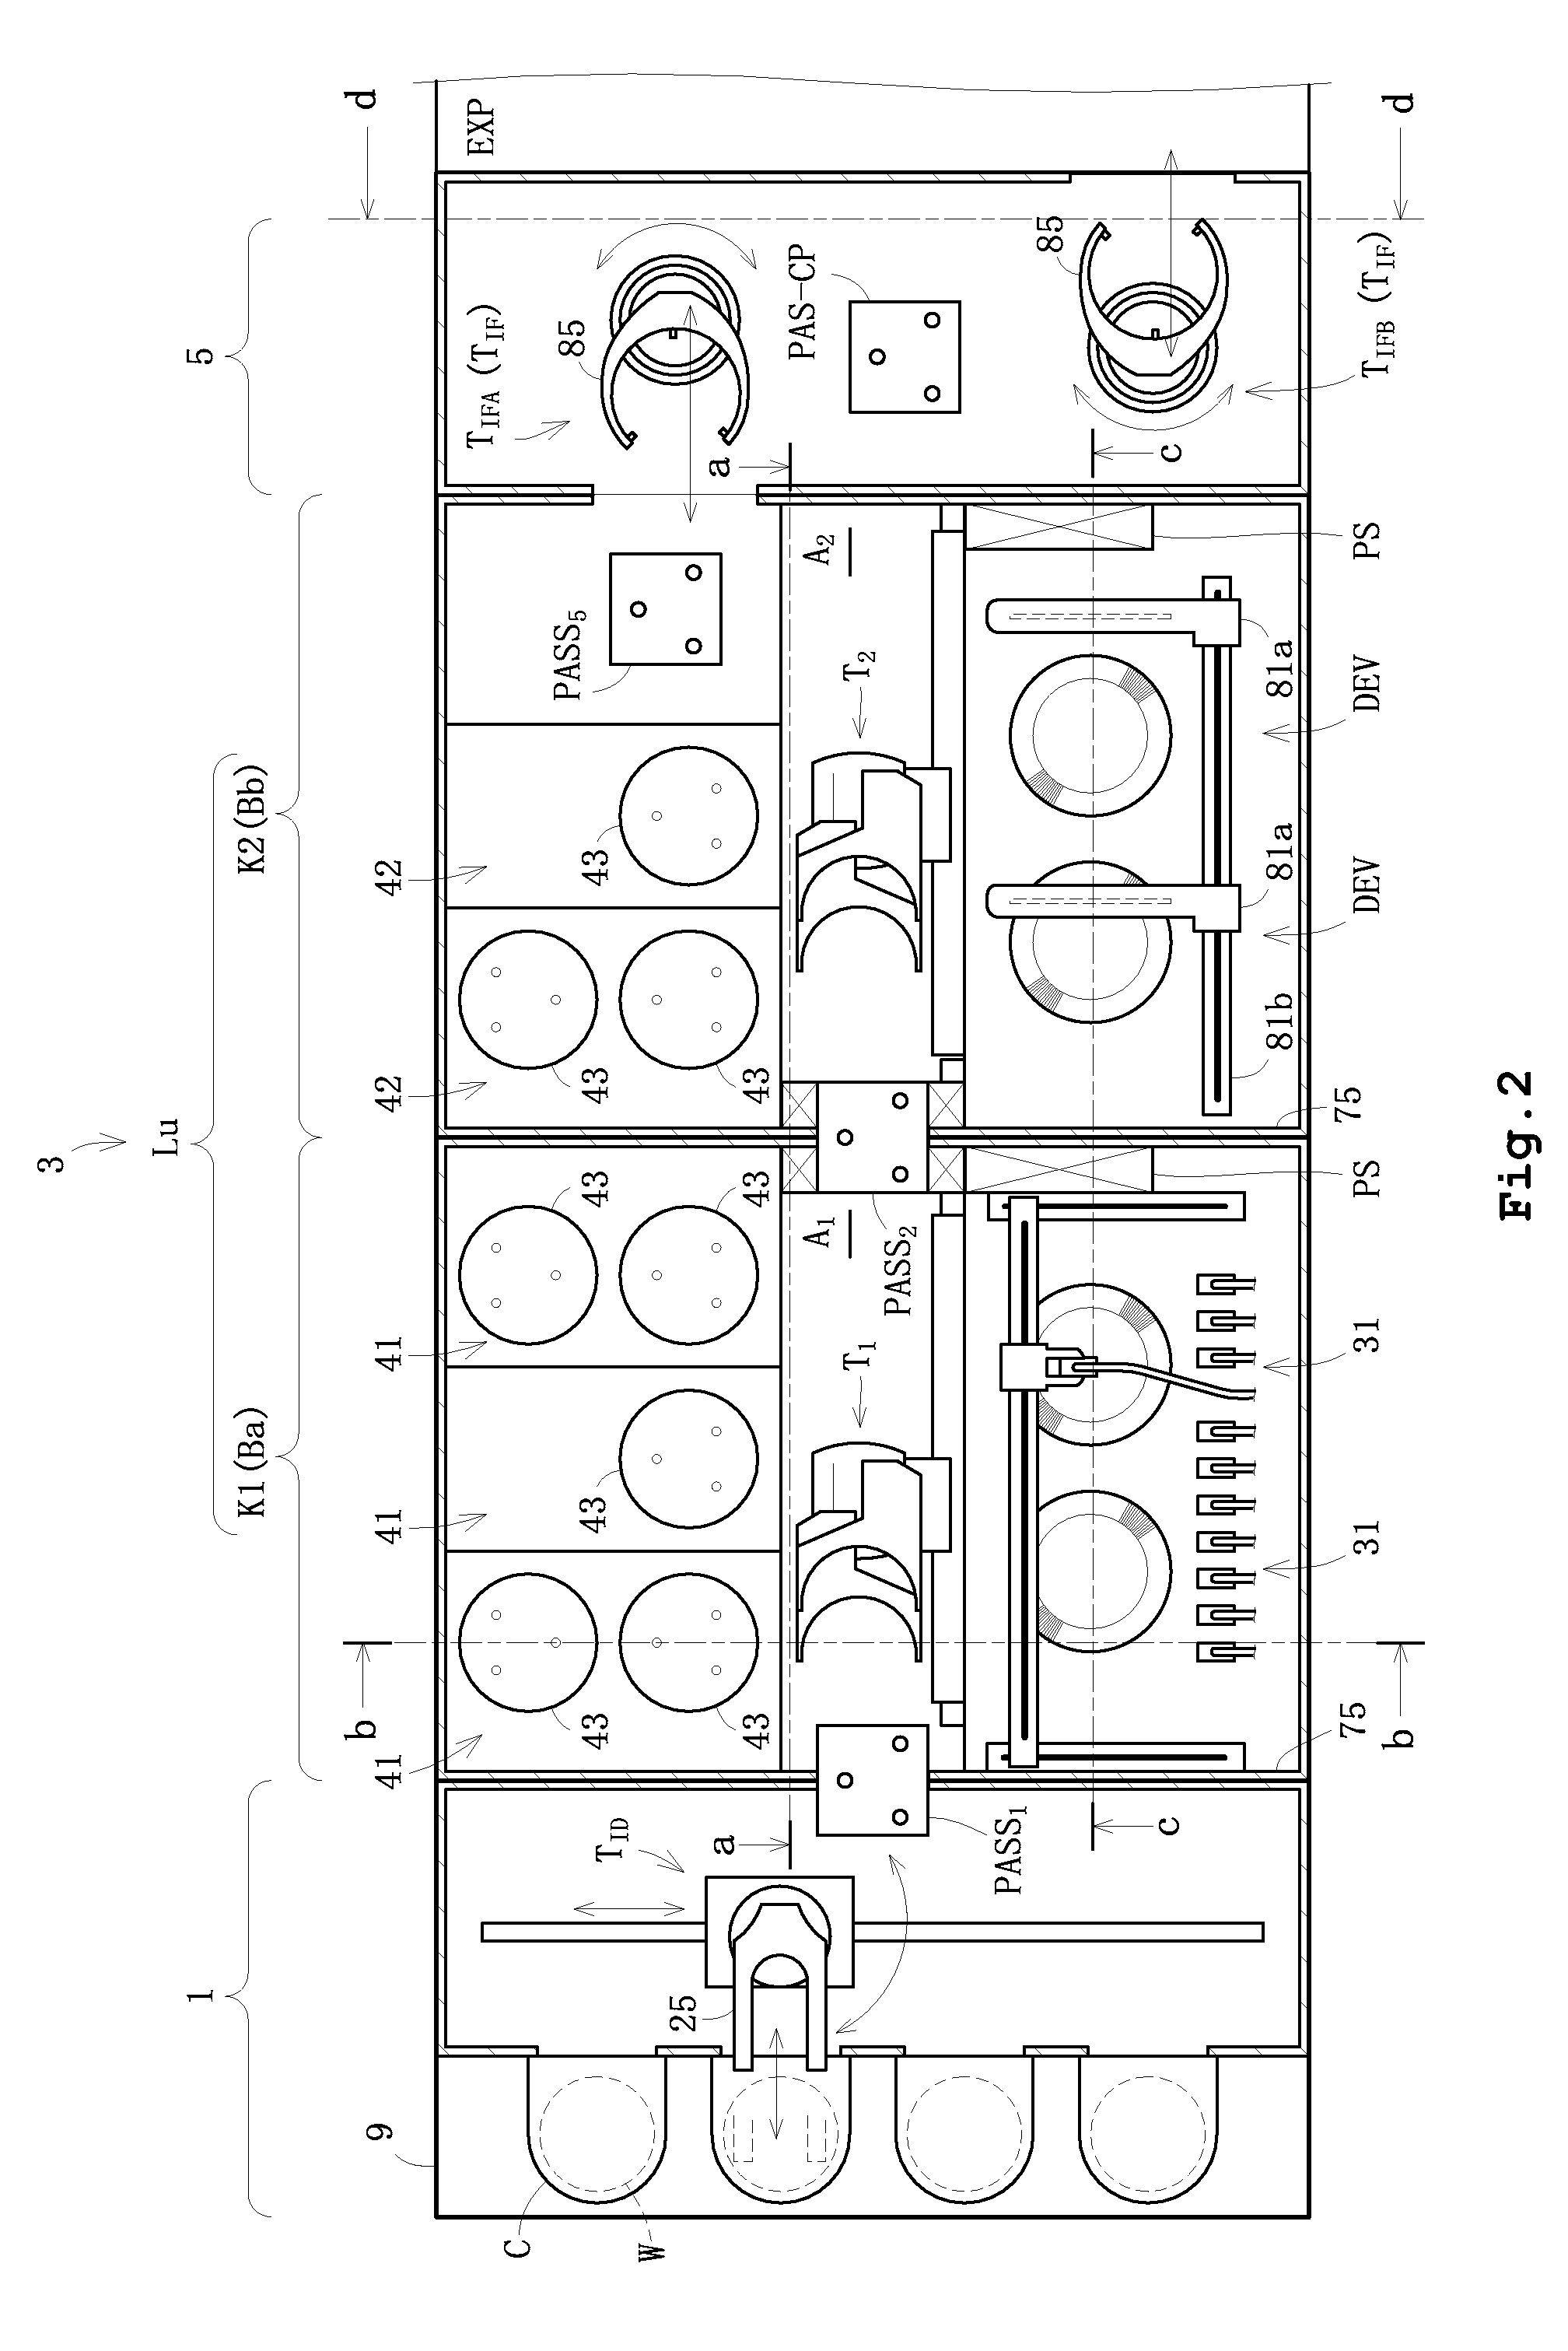 Multi-line substrate treating apparatus